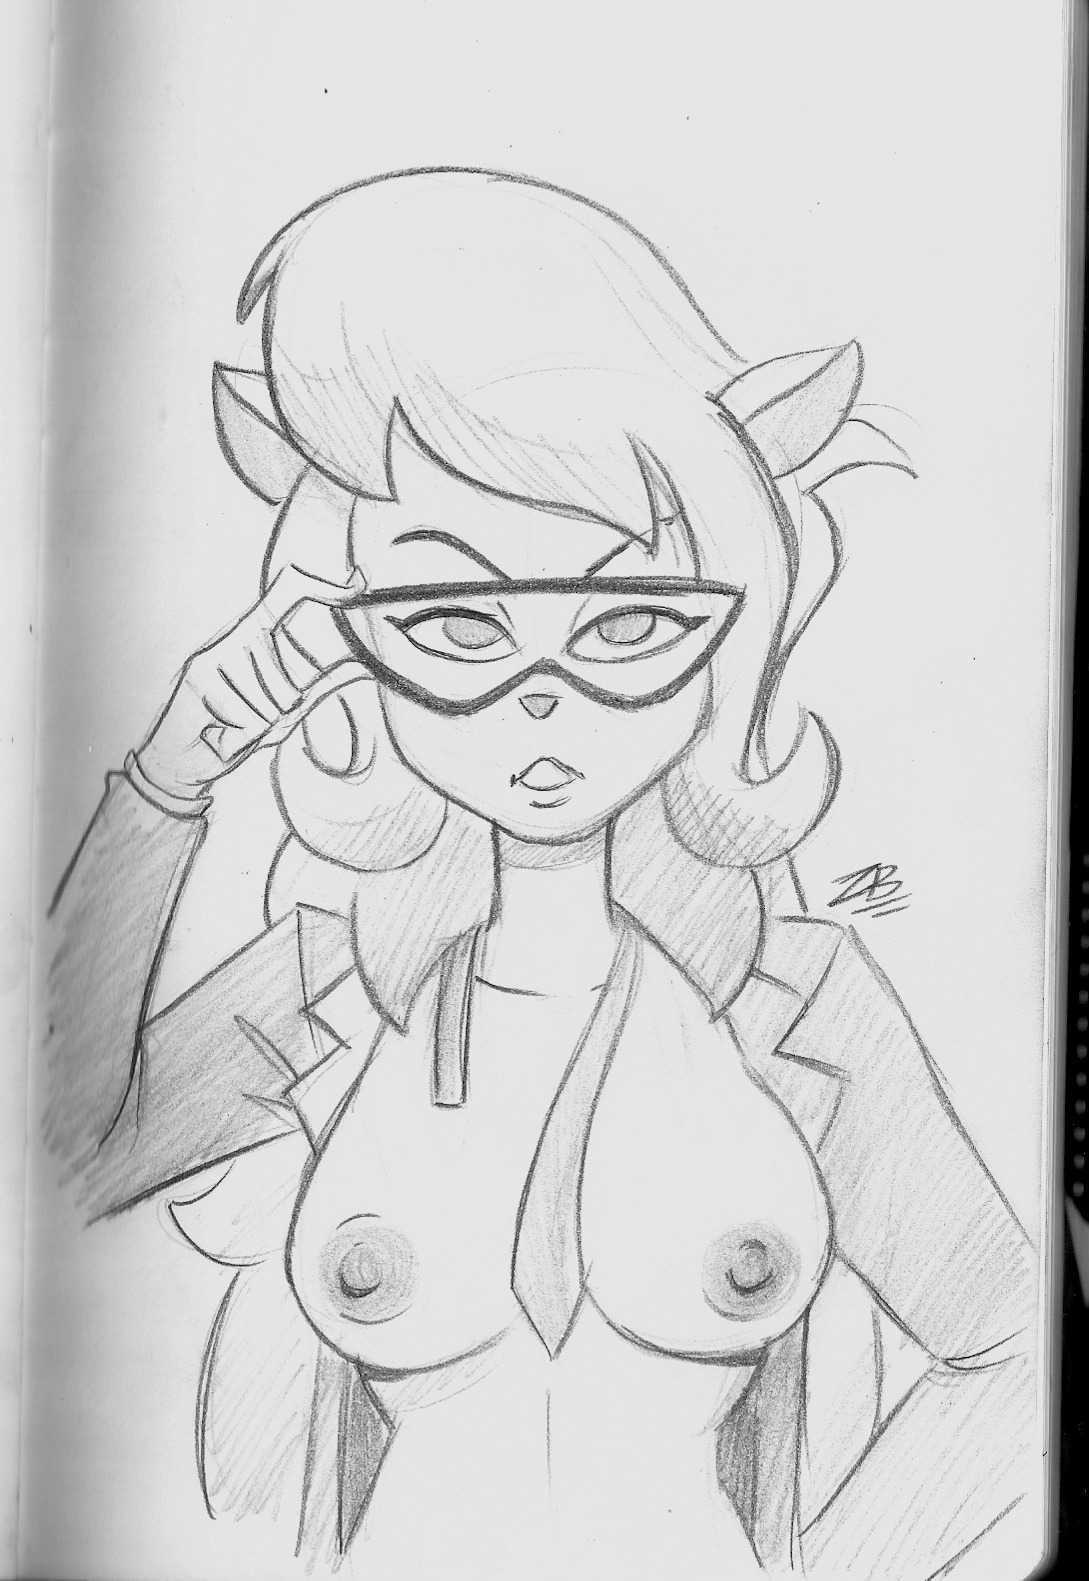 zaribot:  Bustyshot #02 - Callie Briggs from SWAT Kats, as suggested by @jadpeanut